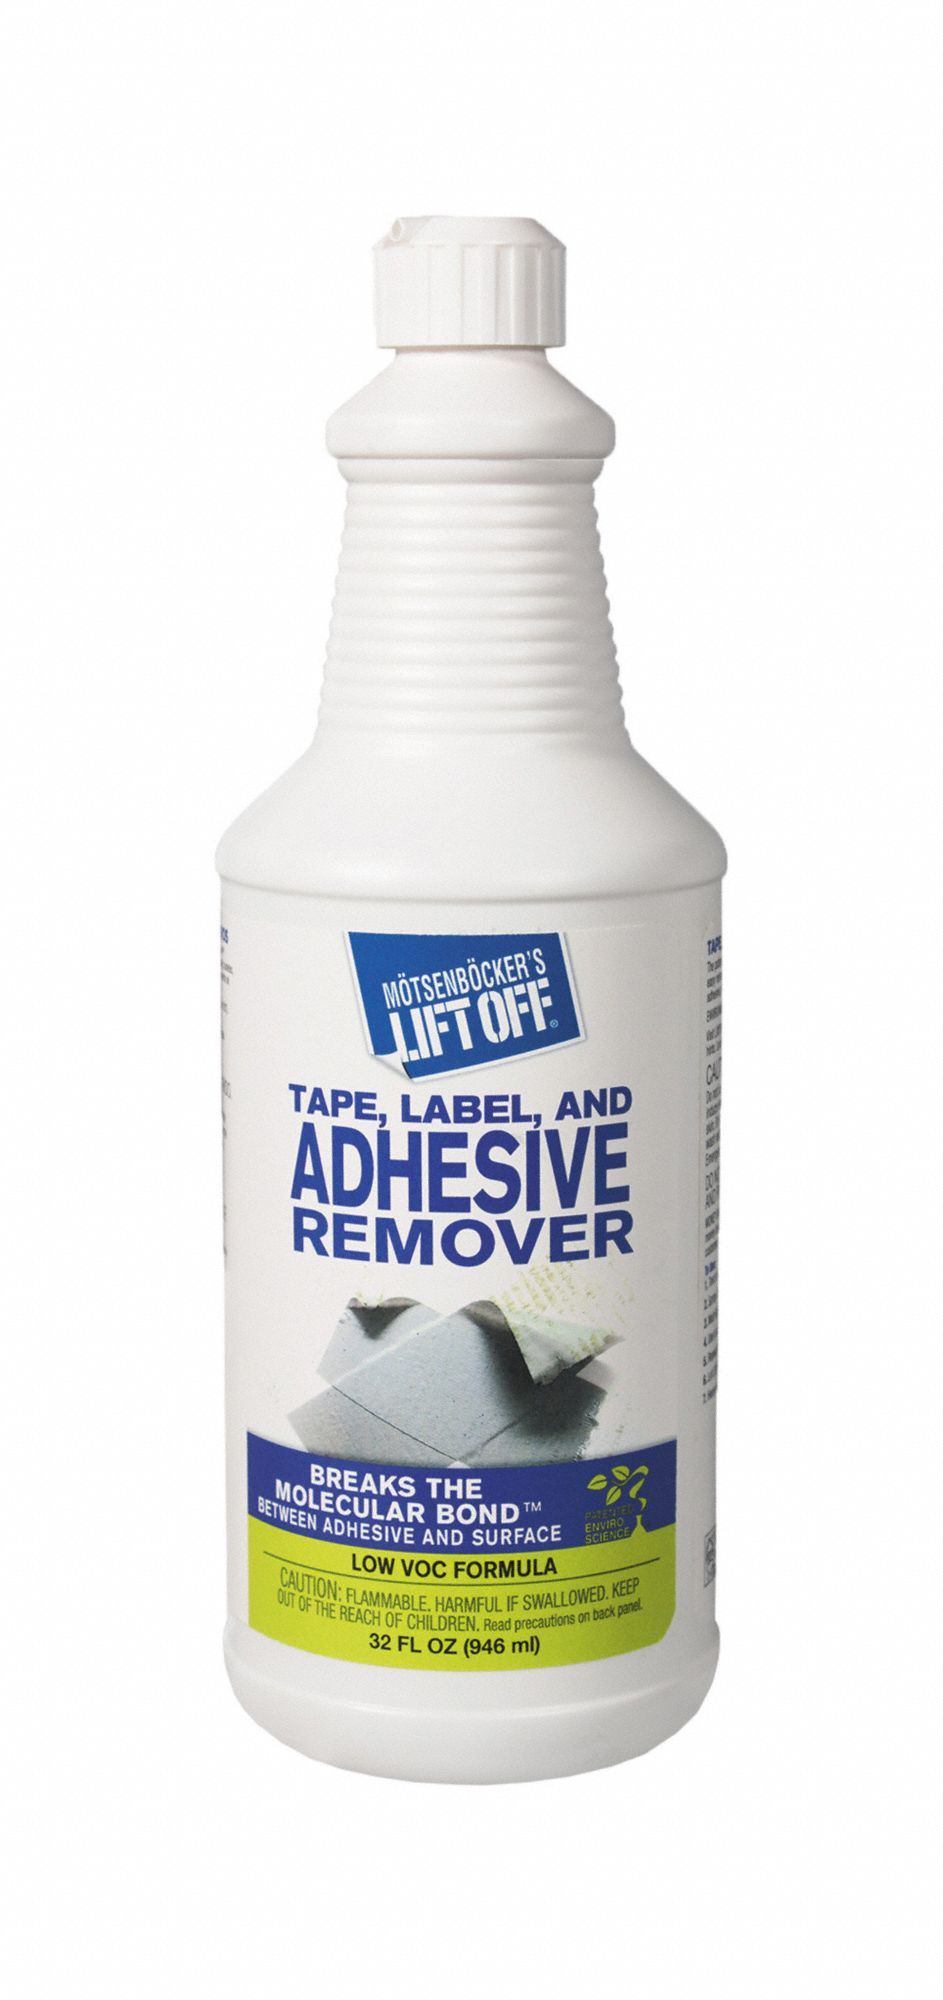 Tape and Adhesive Remover: Bottle, 32 oz Container Size, Ready to Use, 6 PK